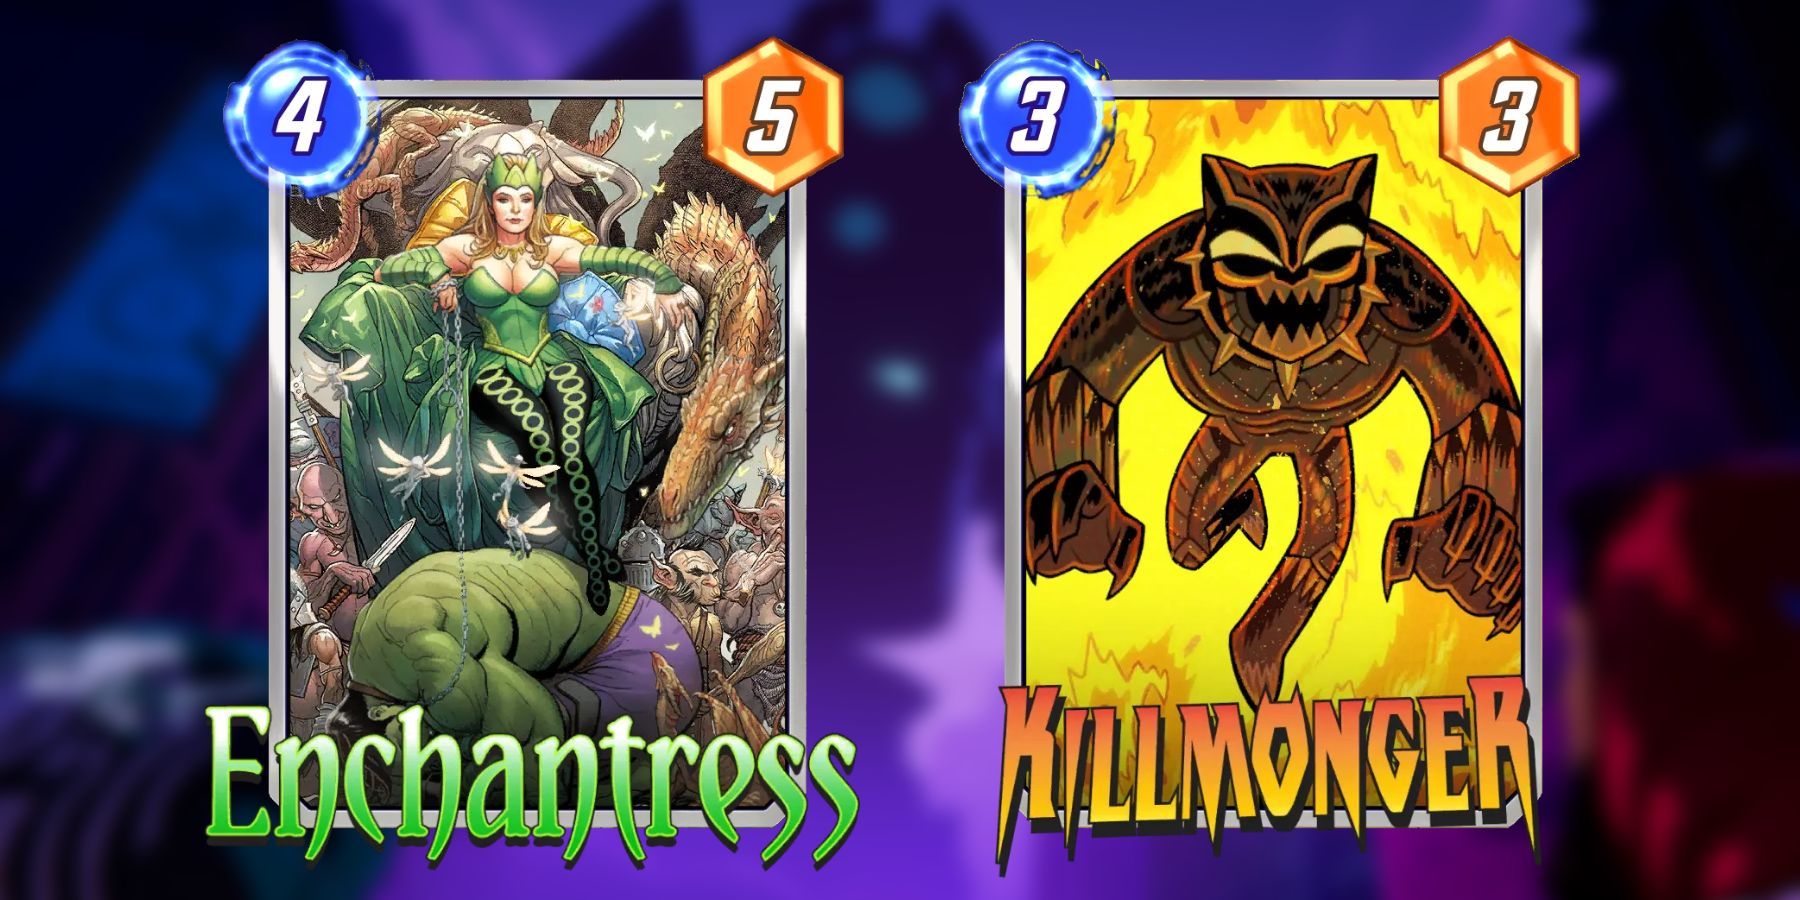 image showing killmonger and enchantress best counters for howard the duck deck in marvel snap.